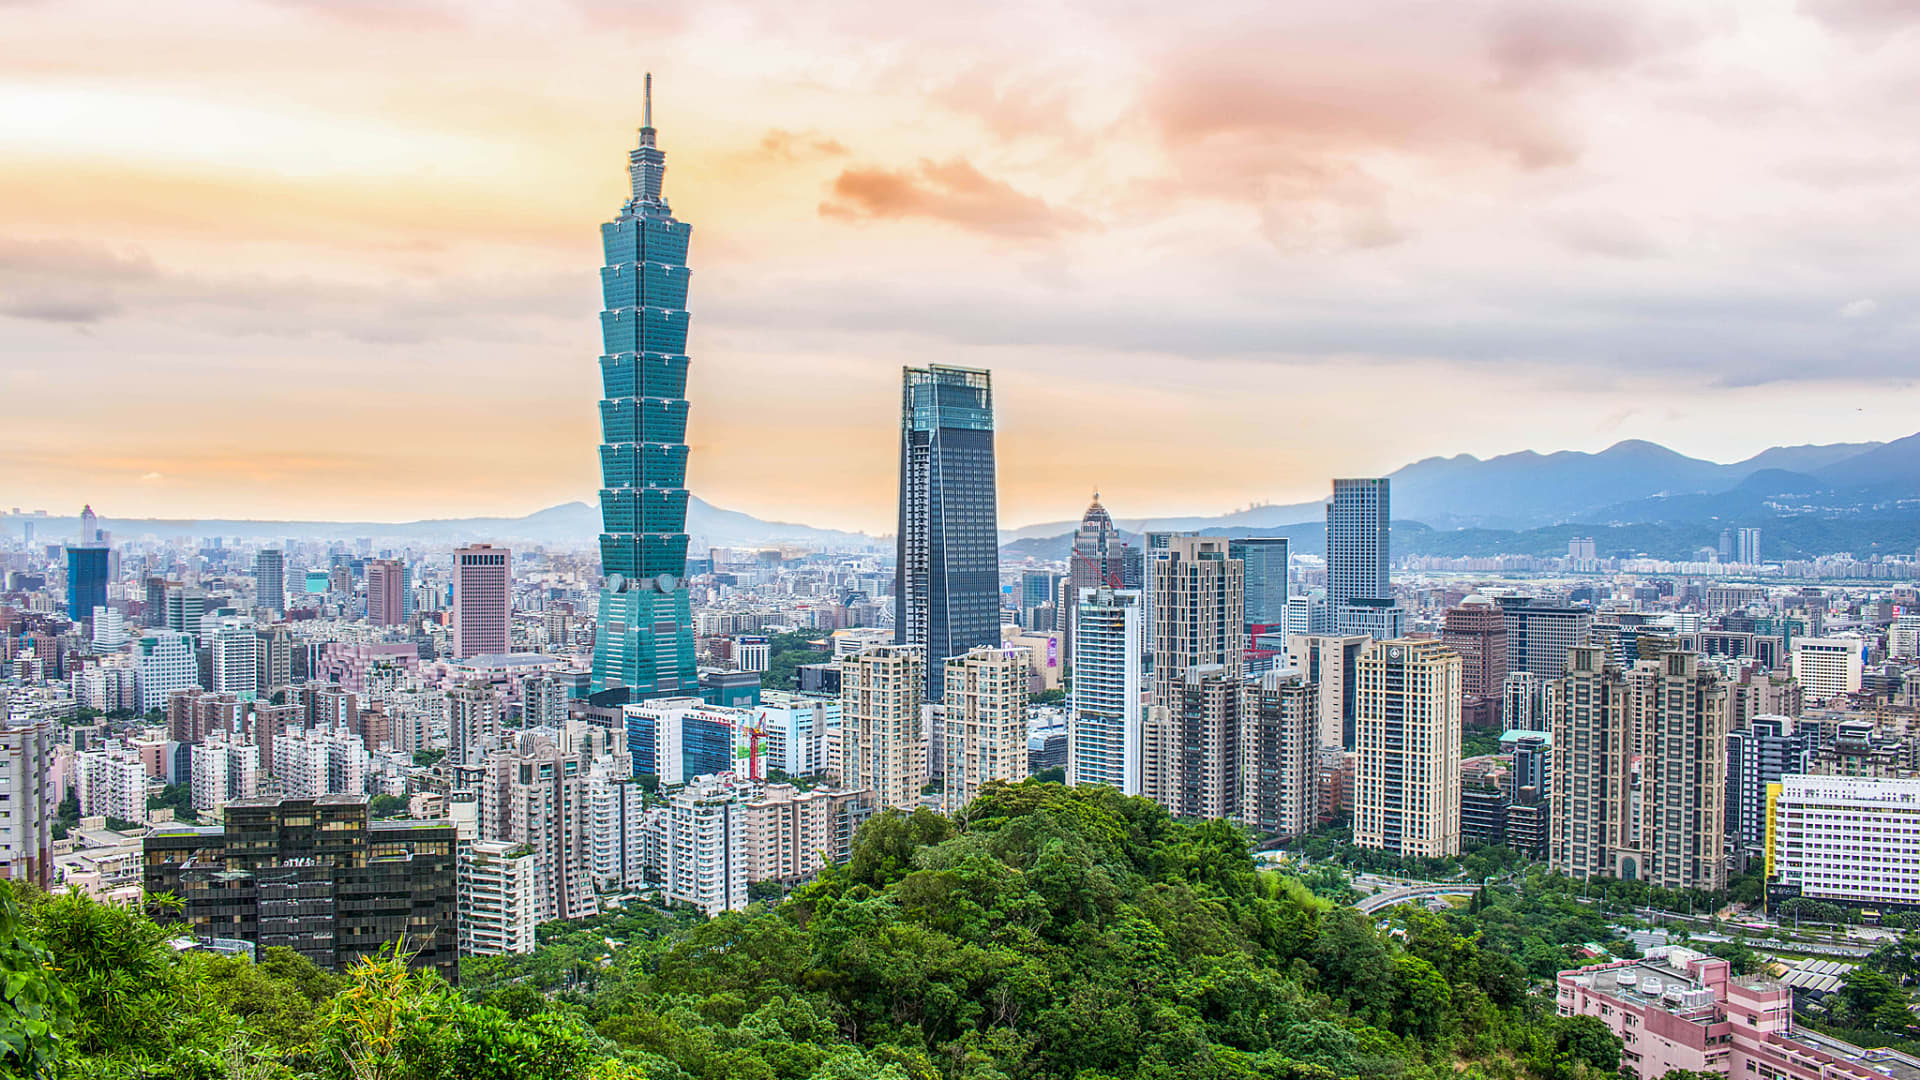 Taiwan shares hit record highs on the AI boom — and it may not be too late to join the party